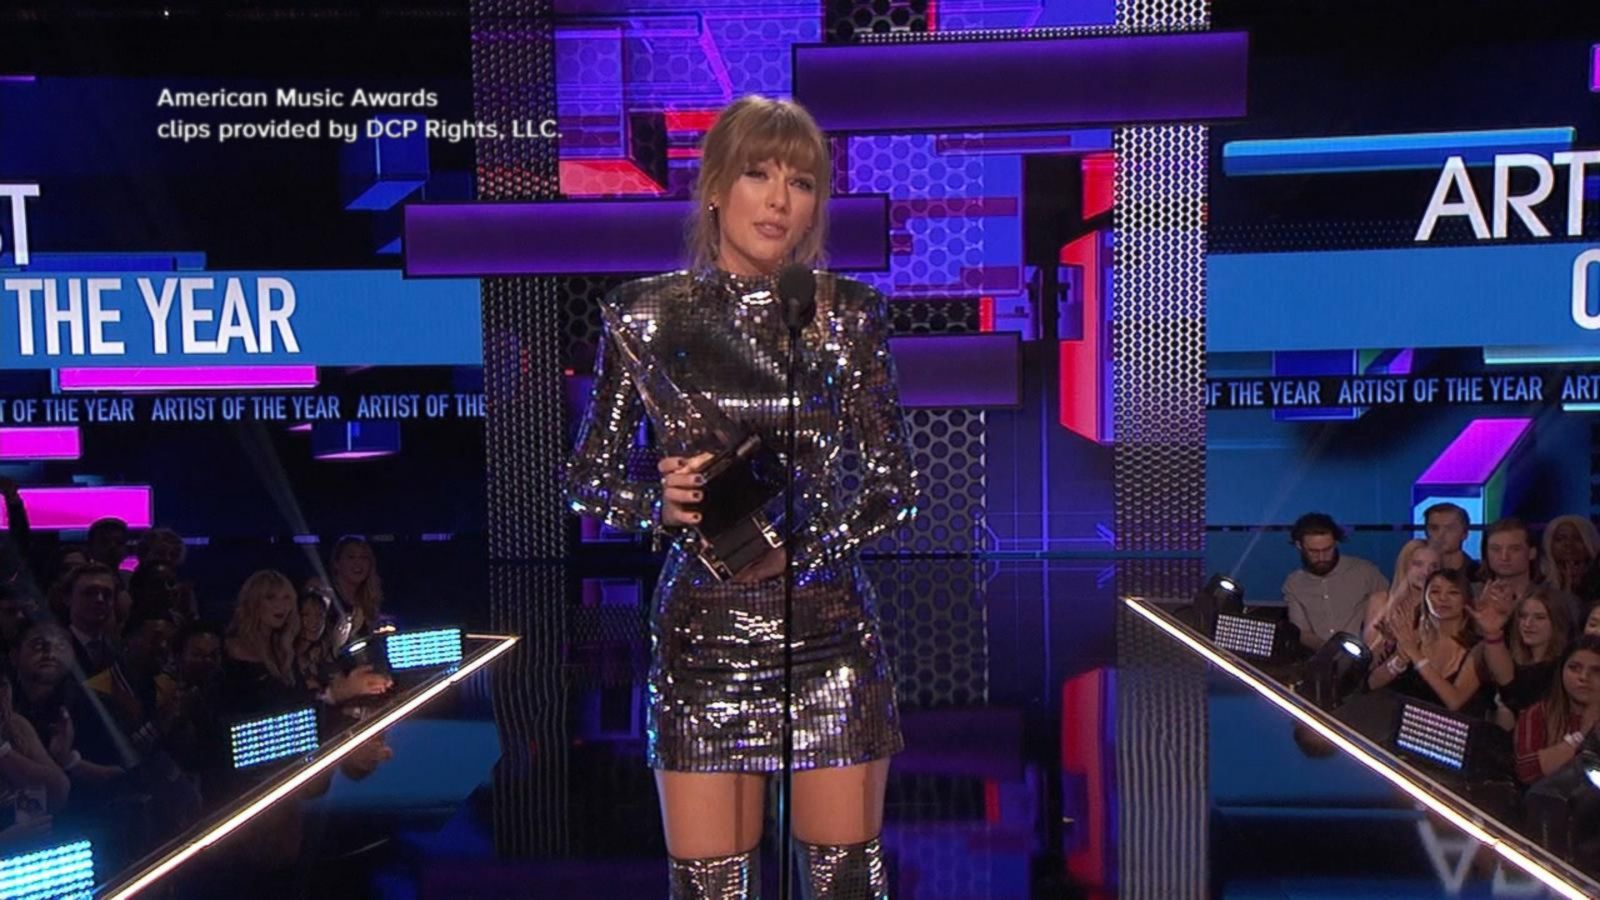 VIDEO: Inside Taylor Swift's record-breaking night at the AMAs